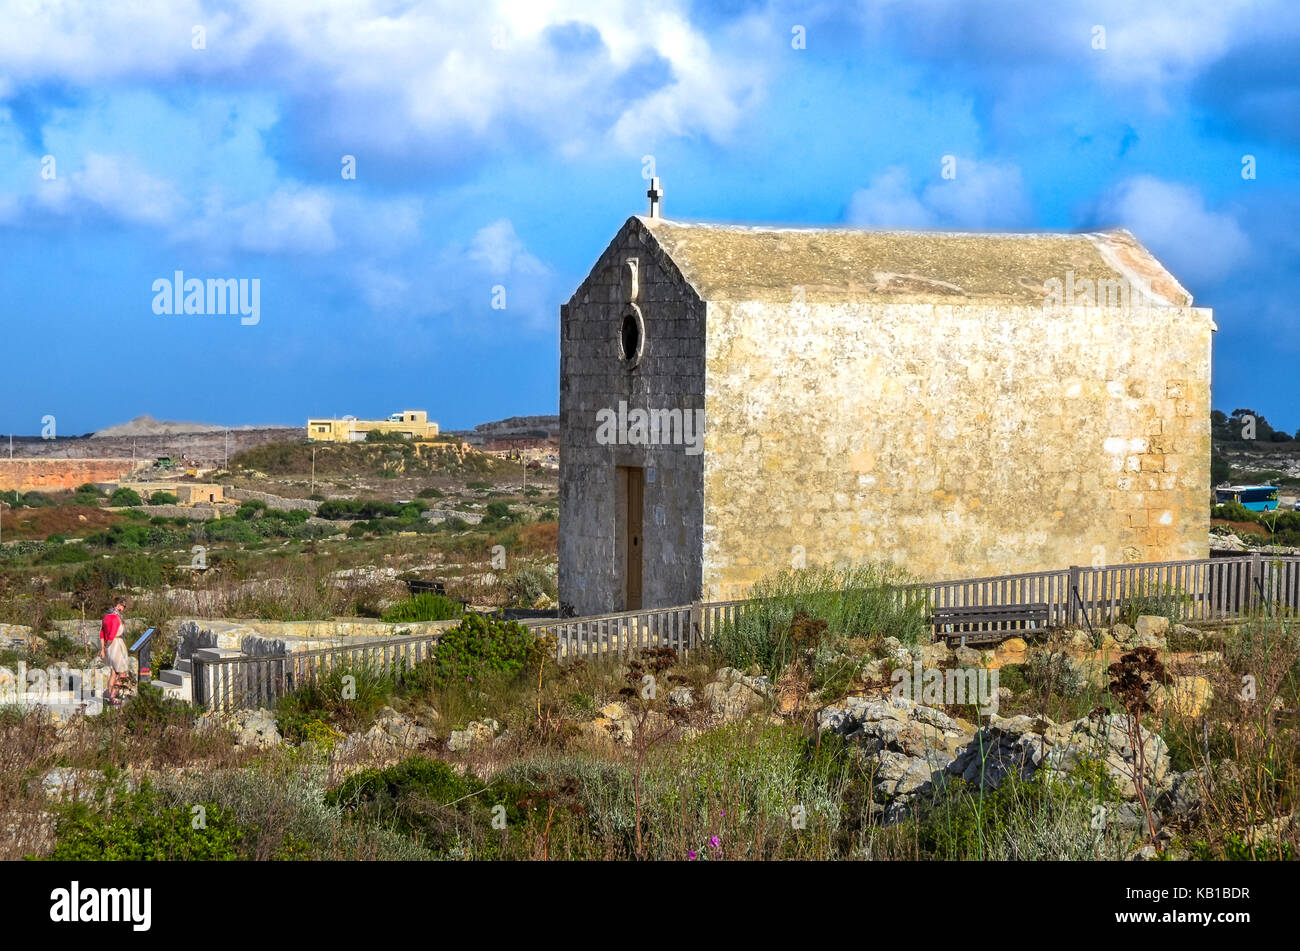 A woman at the chapel of St Mary Magdalene, built in the 17th century, in Dingli, Malta Stock Photo